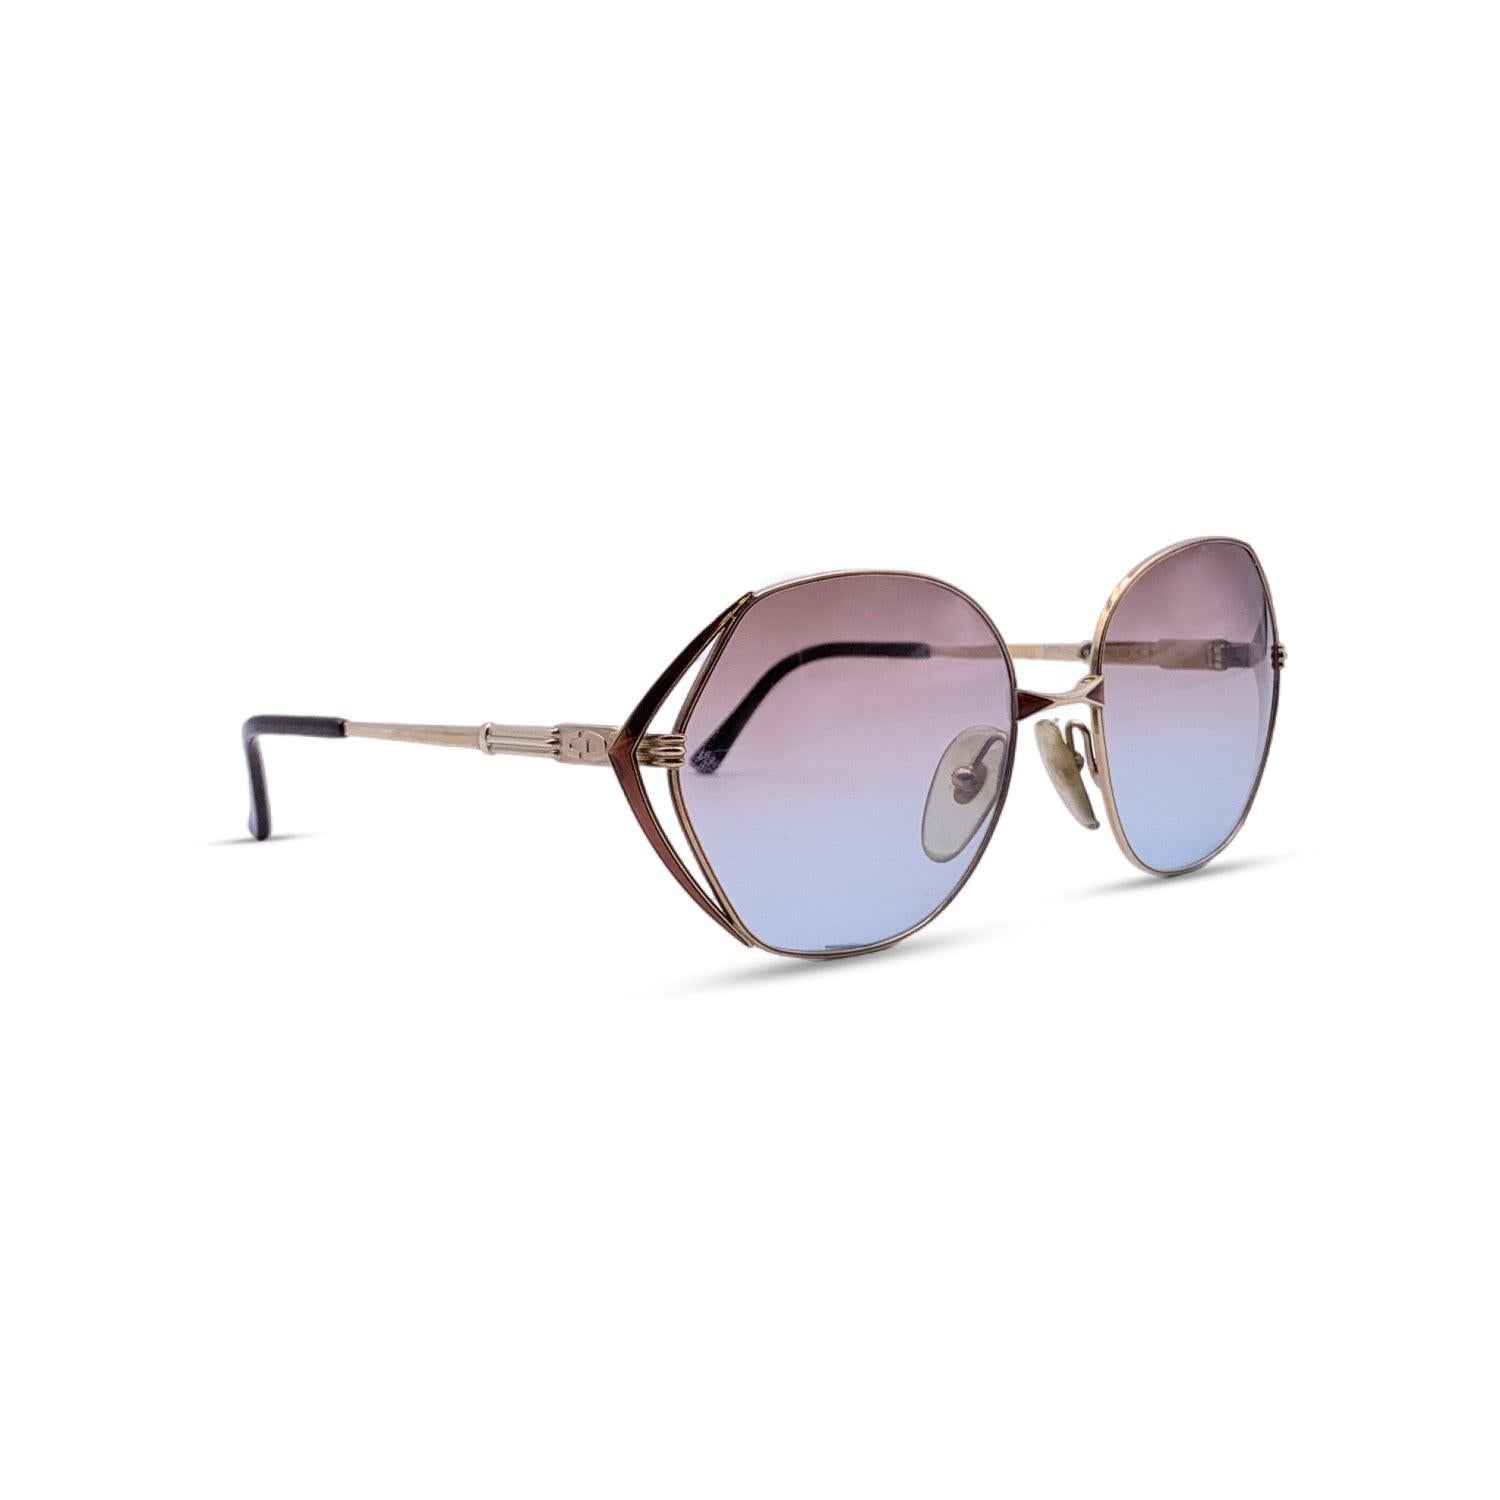 Christian Dior Vintage Women Oversized Sunglasses 2302 41 56/17 125mm In Excellent Condition For Sale In Rome, Rome